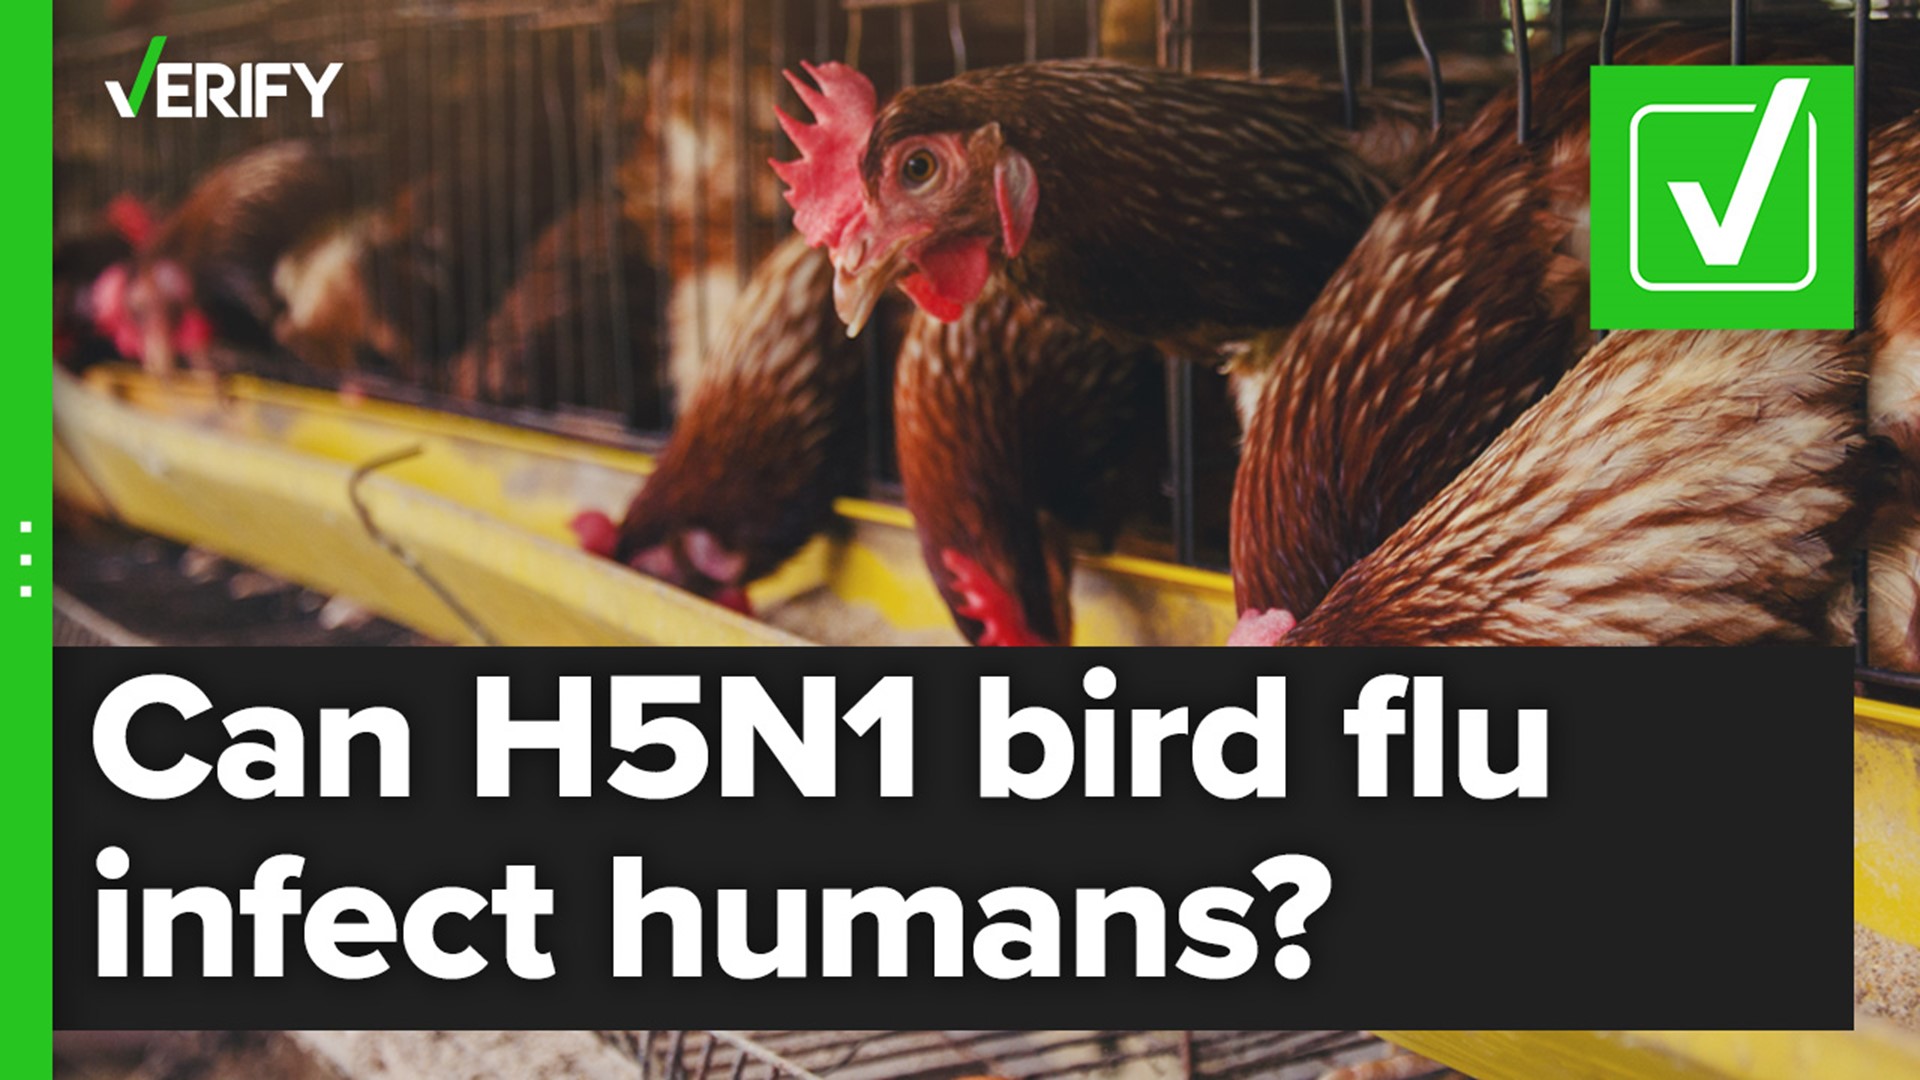 People who don’t directly interact with birds are unlikely to catch the virus and properly cooked poultry is still safe to eat, experts say.